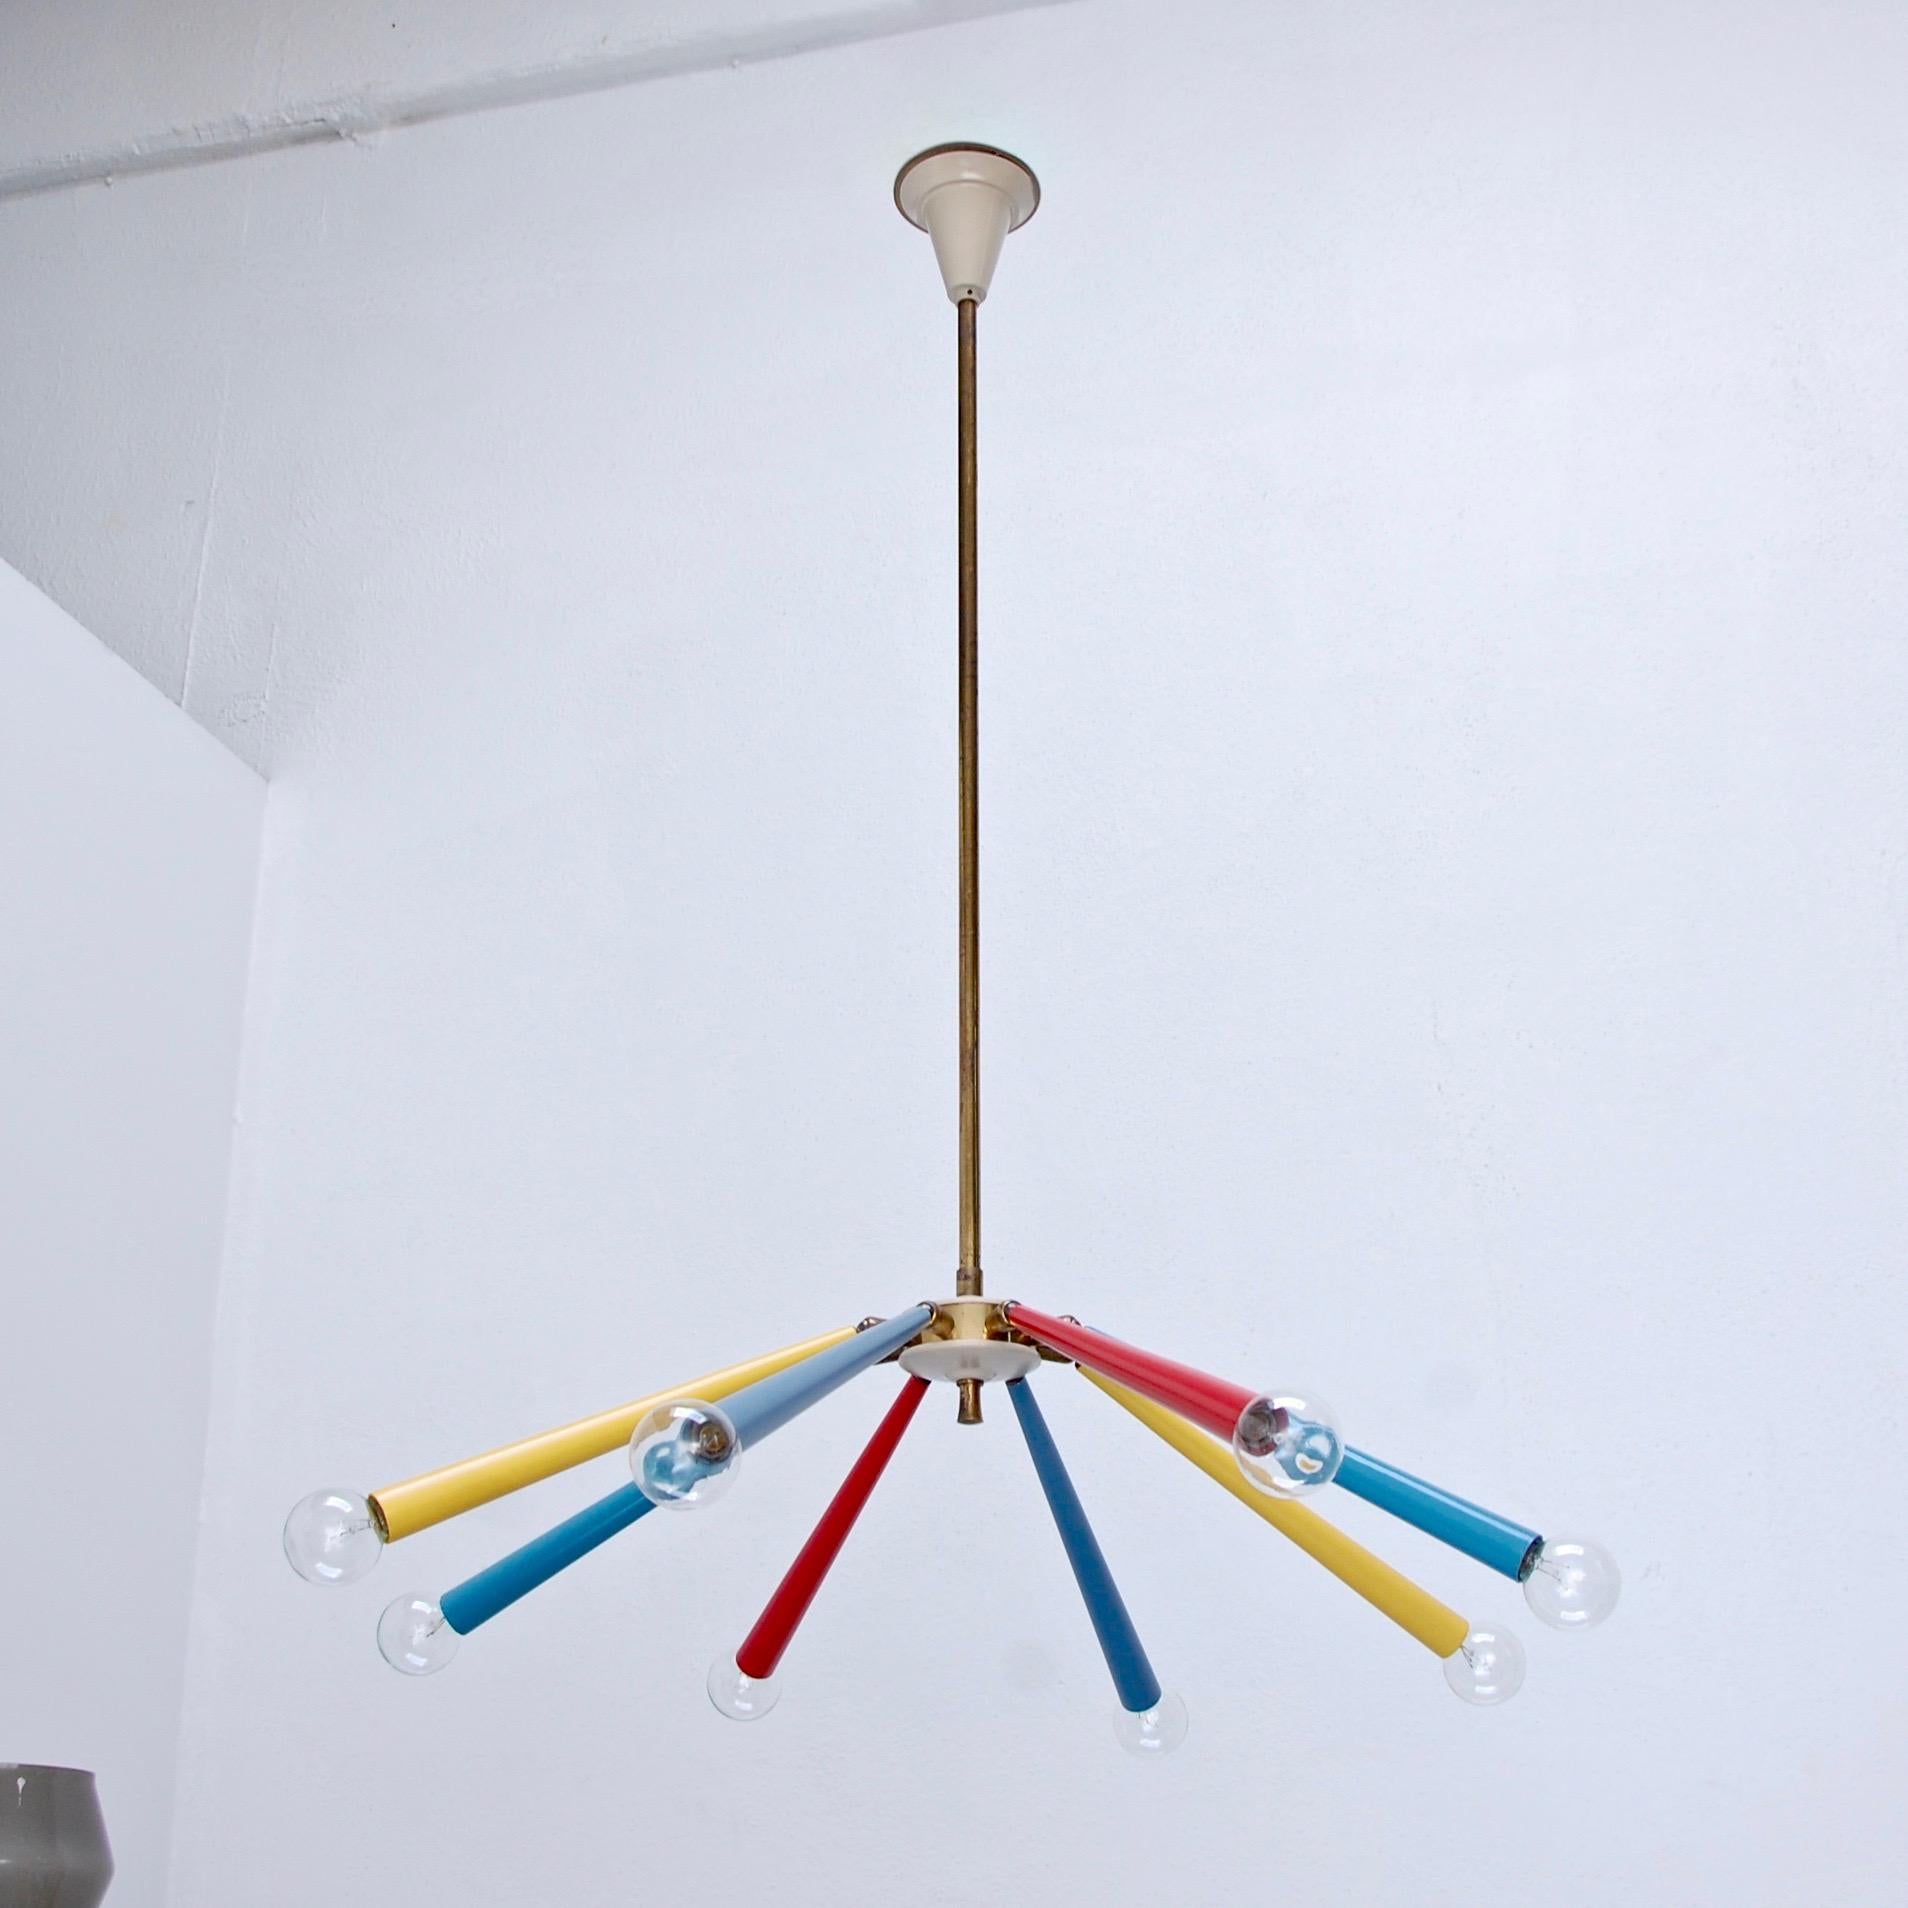 1950s multicolored adjustable sputnik by Arredoluce of Italy. 8 arm sputnik with the capability to adjust the angle of the arms due to joints at the centre hub. Partially restored, original brass finish. 8 E12 candelabra based sockets. Light bulbs